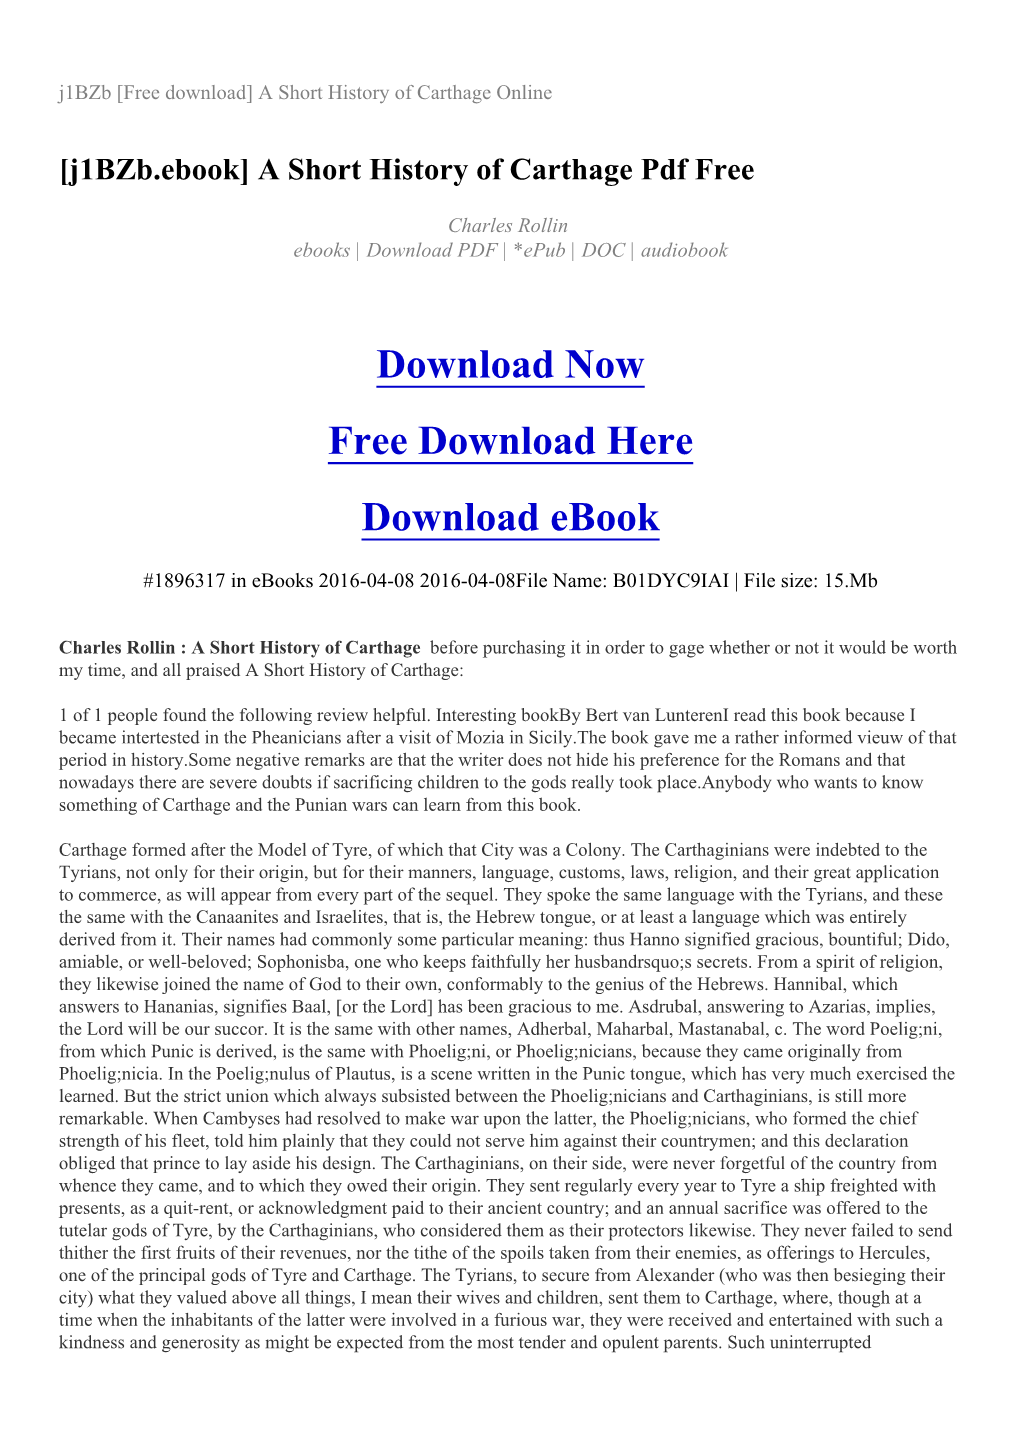 J1bzb [Free Download] a Short History of Carthage Online